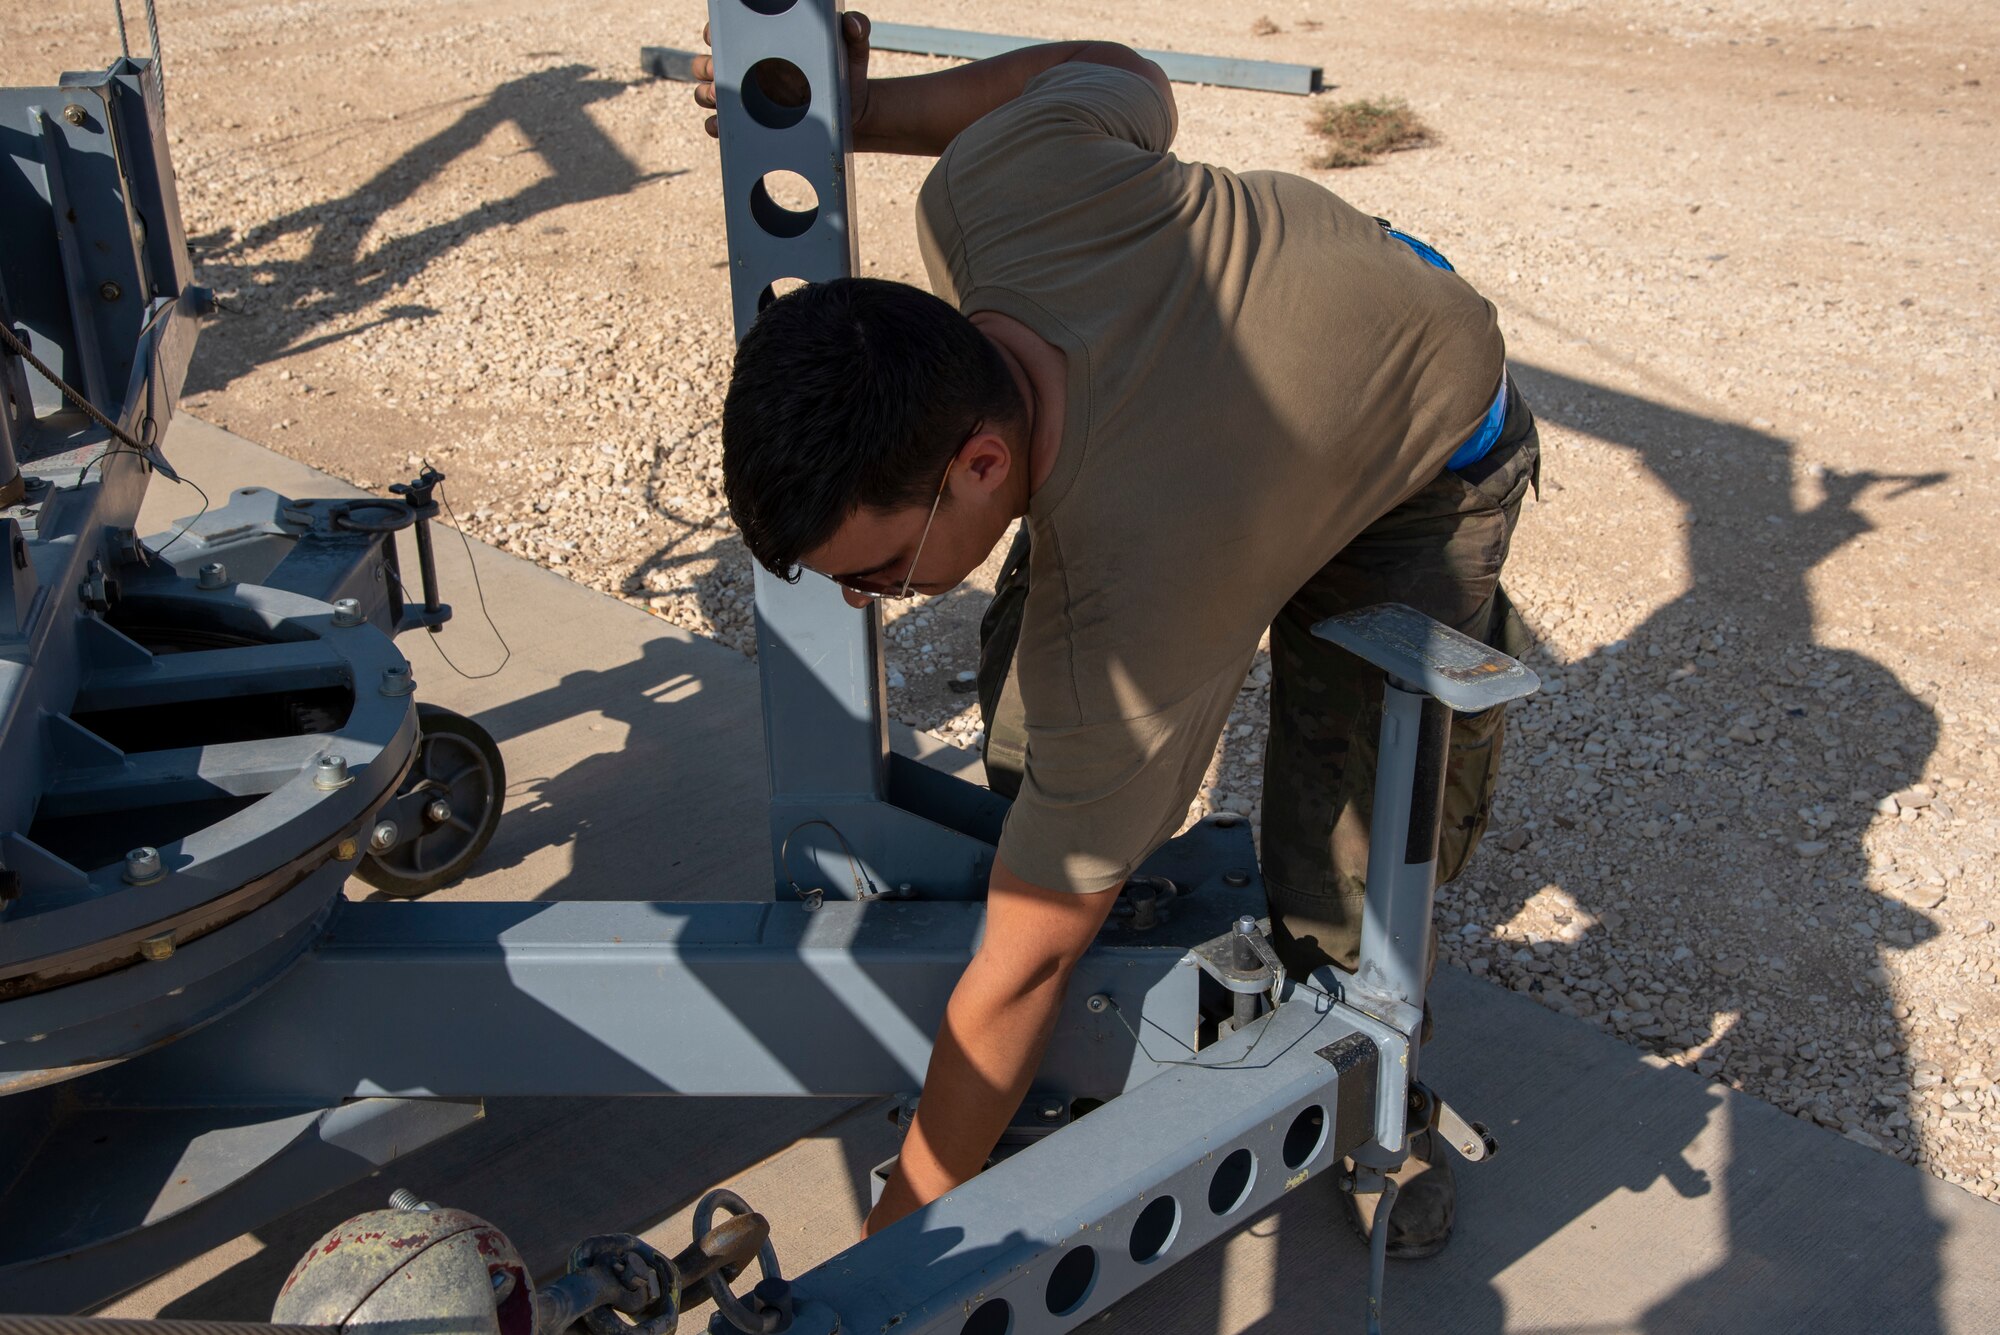 Senior Airman Jacob Karn, an Aerospace Ground Equipment Mechanic with the 332d Expeditionary Maintenance Squadron, turns off the brakes of a canopy crane to prepare it for towing at an undisclosed location, Southwest Asia, Nov. 11, 2022. These cranes are used to remove the canopy and other heavy components of an F-15E Fighting Falcon for repairs. (U.S. Air Force photo by: Tech. Sgt. Jim Bentley)